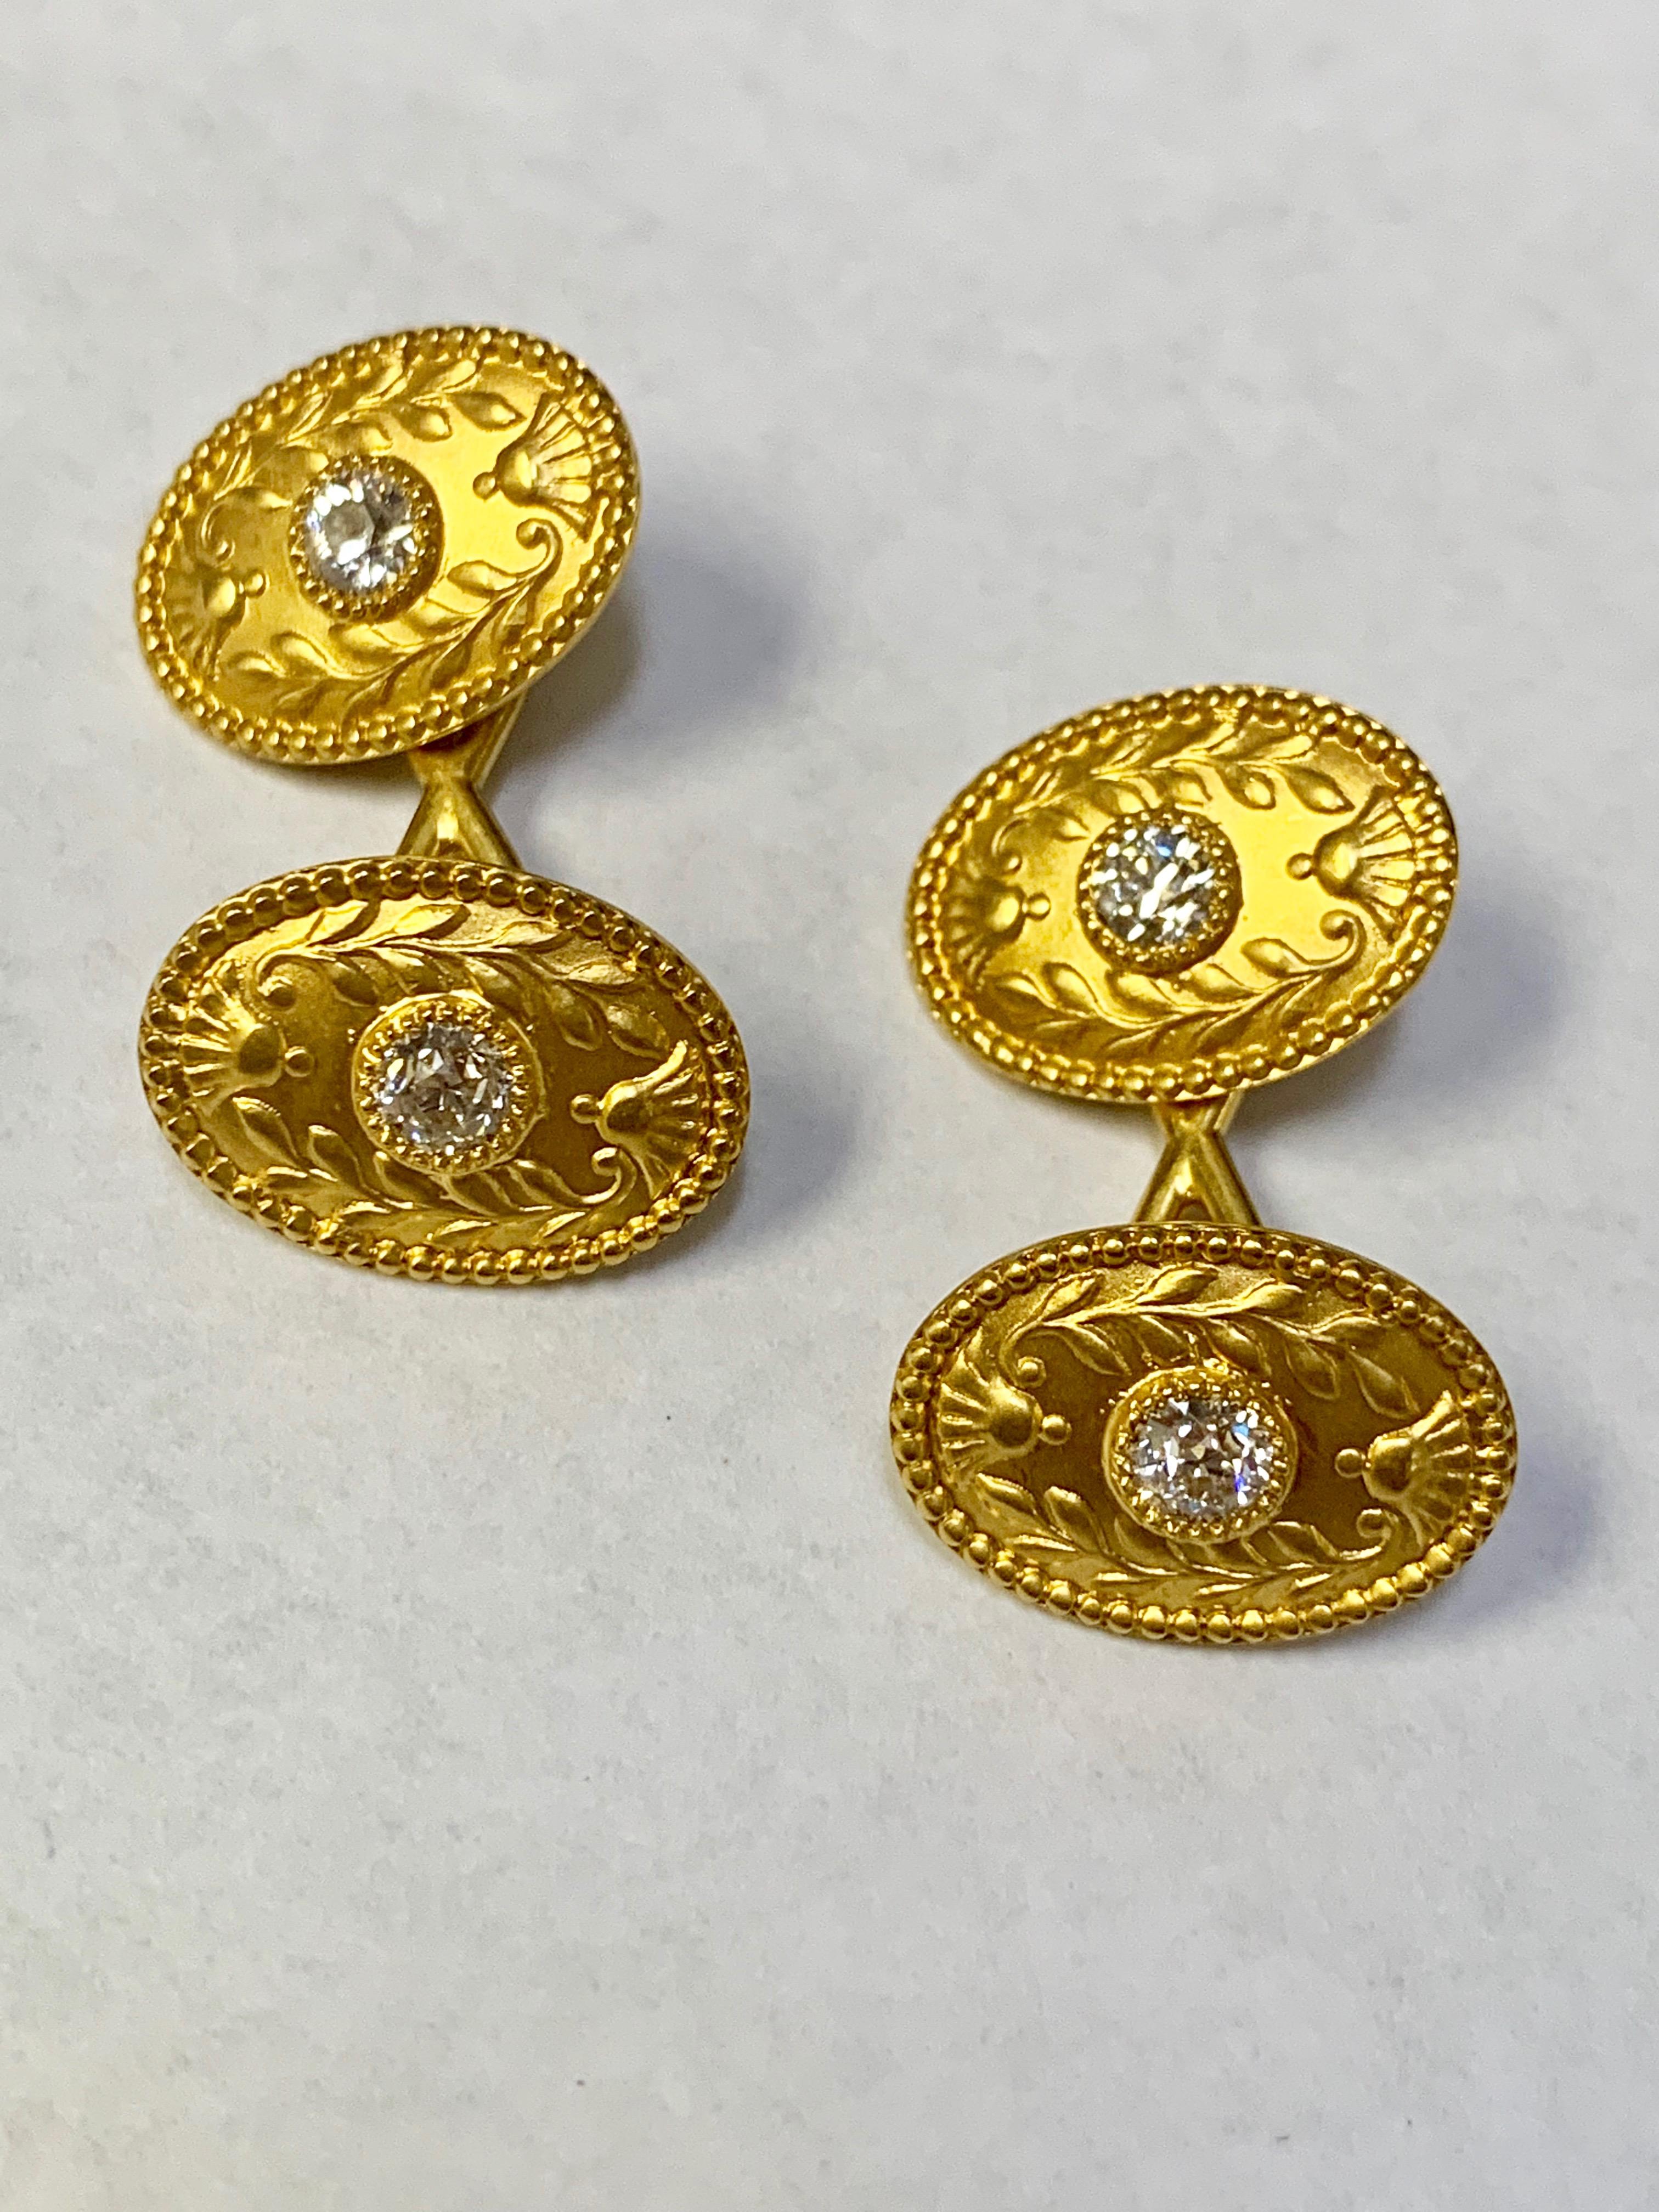 Antique Art Nouveau Tiffany & Co 18ky diamond oval shaped cufflinks.  Approximately 0.80 carat total weight of Old European cut diamonds G-H color and VS2-SI1 clarity.  Diamonds are bezel set with milgrain detailing.  Stamped 